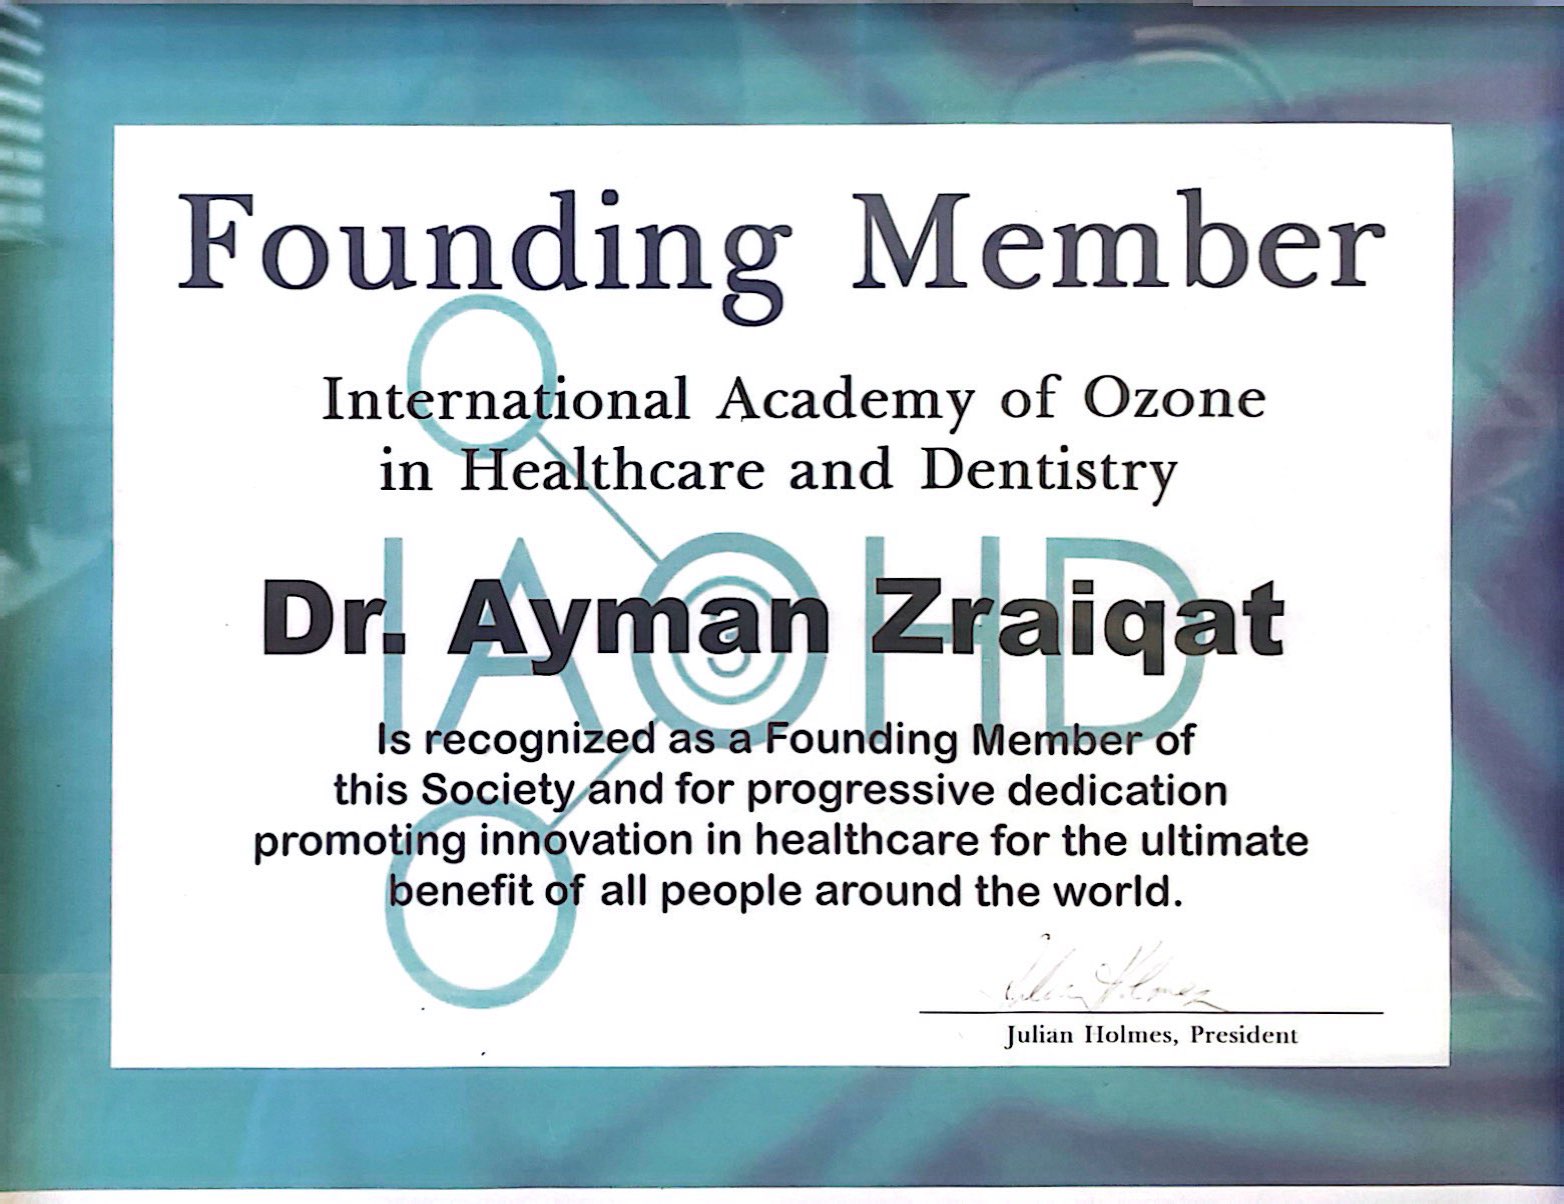 Certificate recognizing Dr. Ayman Zraiqat as a Founding Member of the International Academy of Ozone in Healthcare and Dentistry.